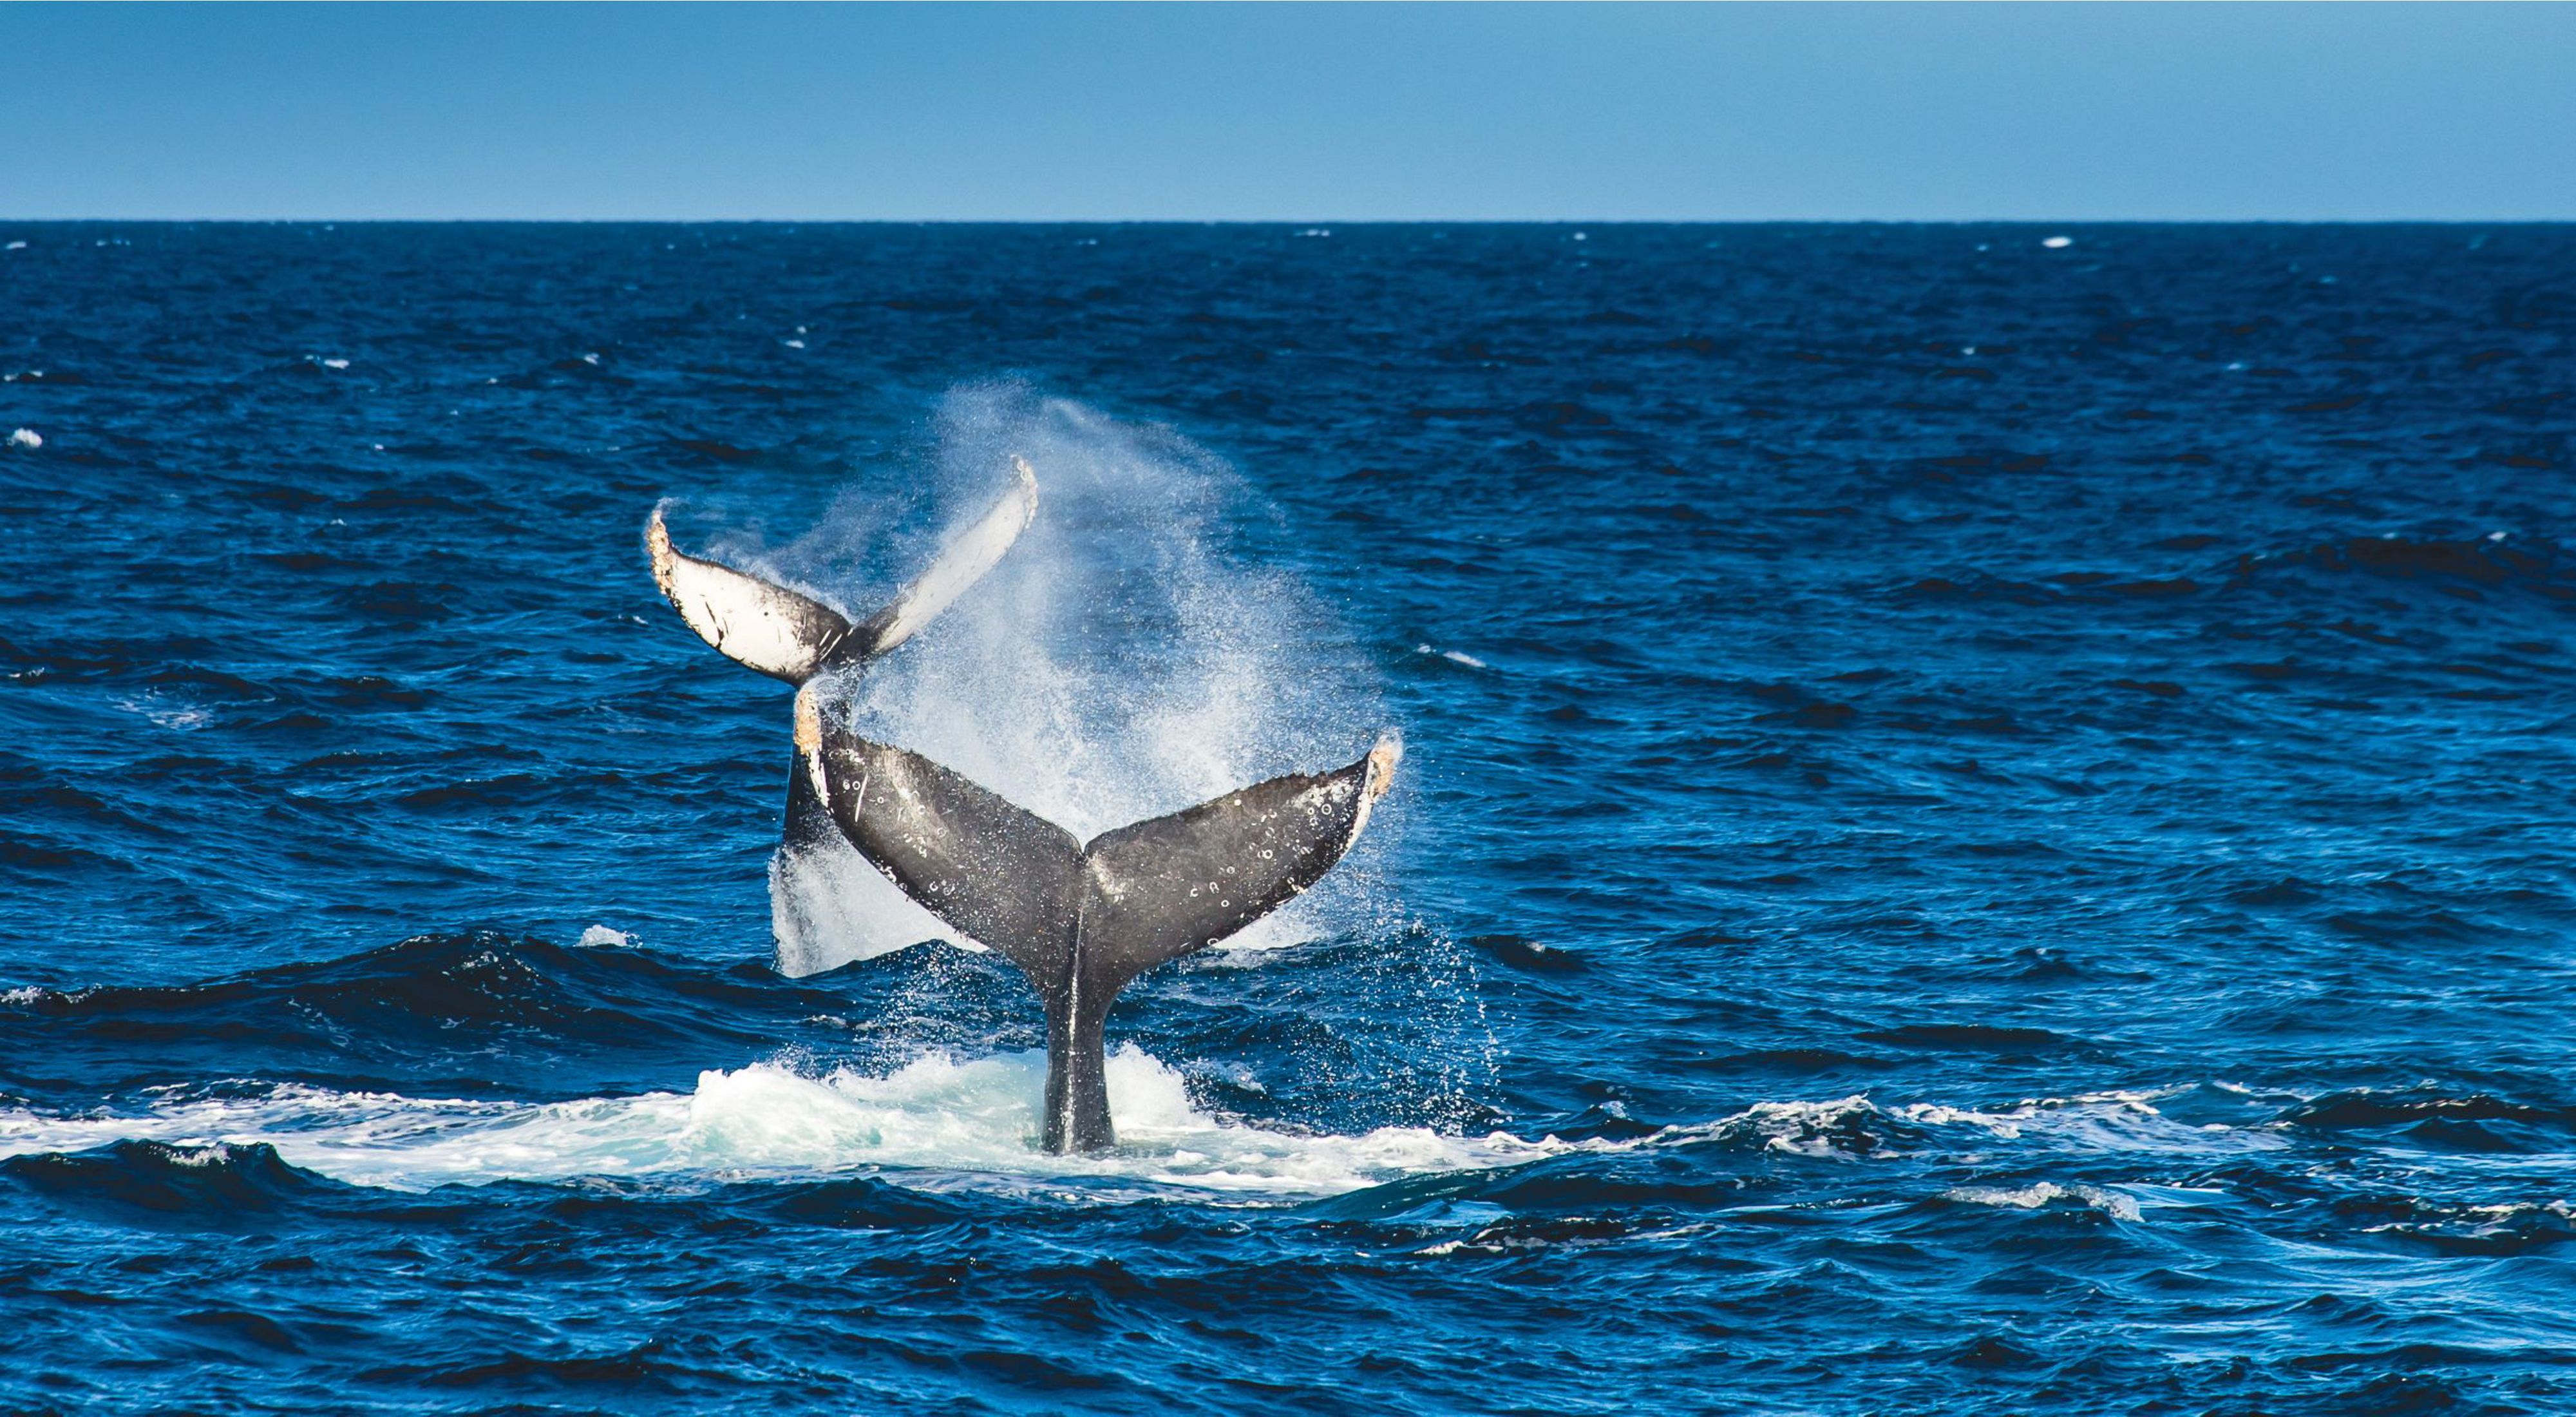 Two humpback whale tale fins stand above the waters surface as the whales dive.